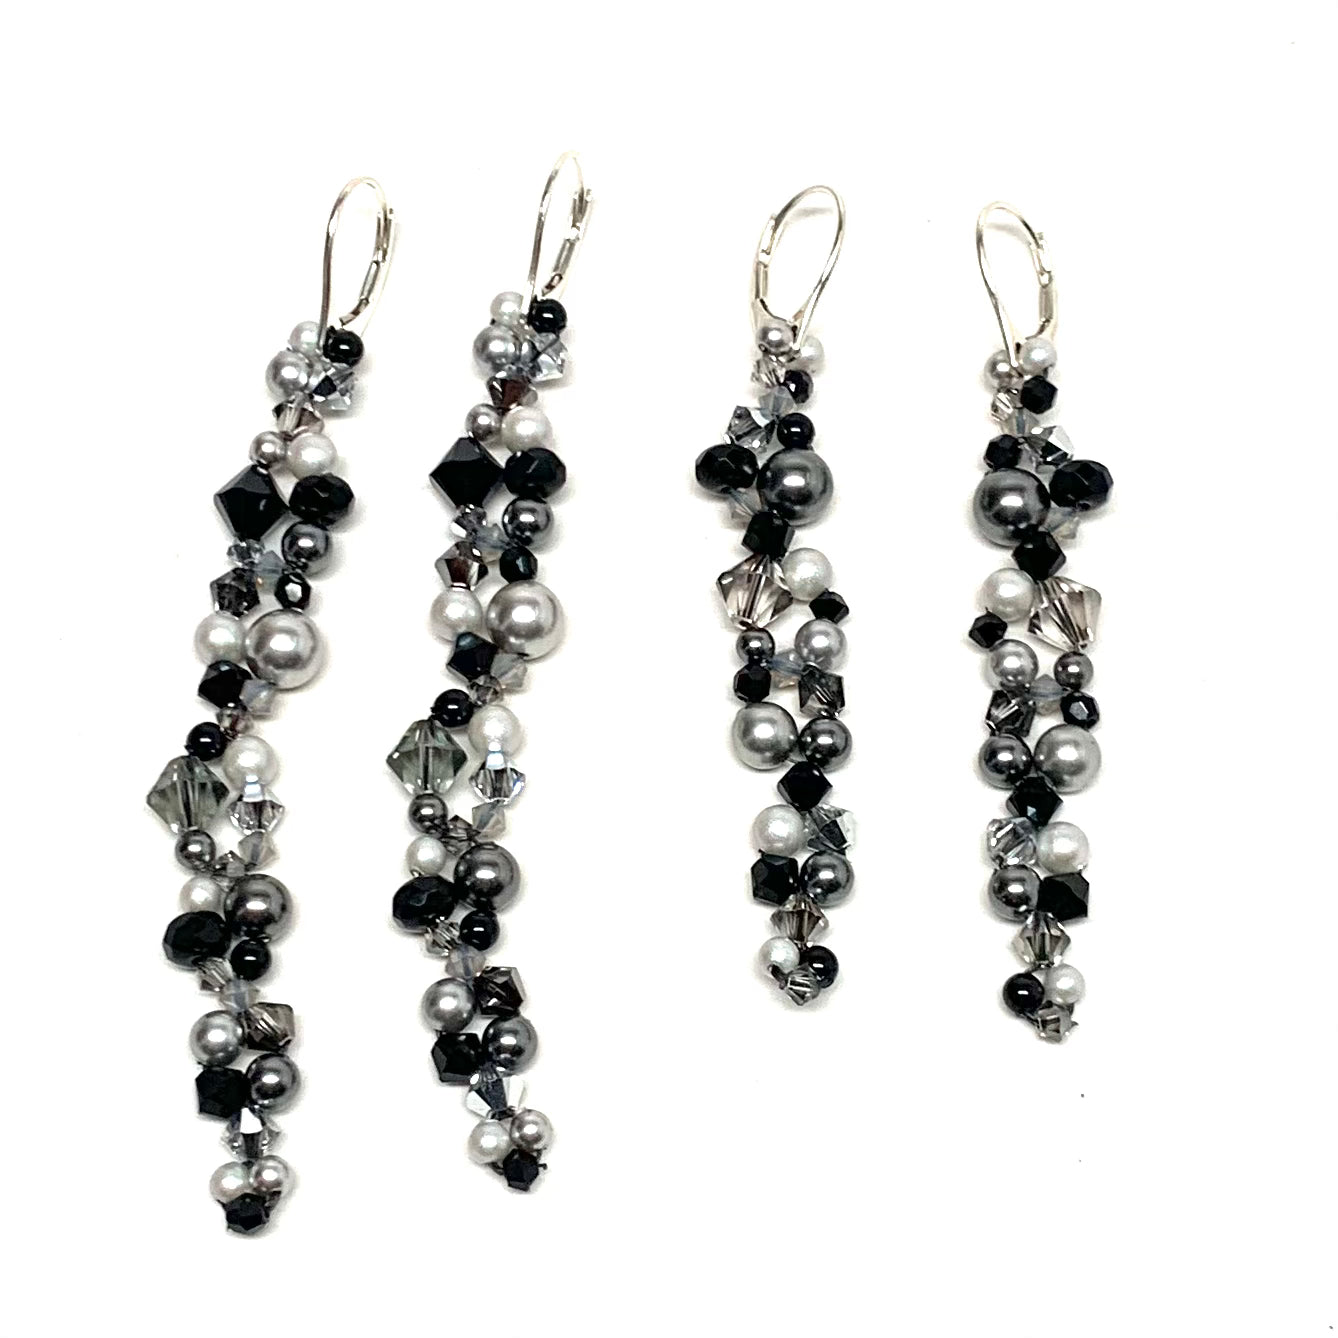 Polly Earring | Black, White and Grey